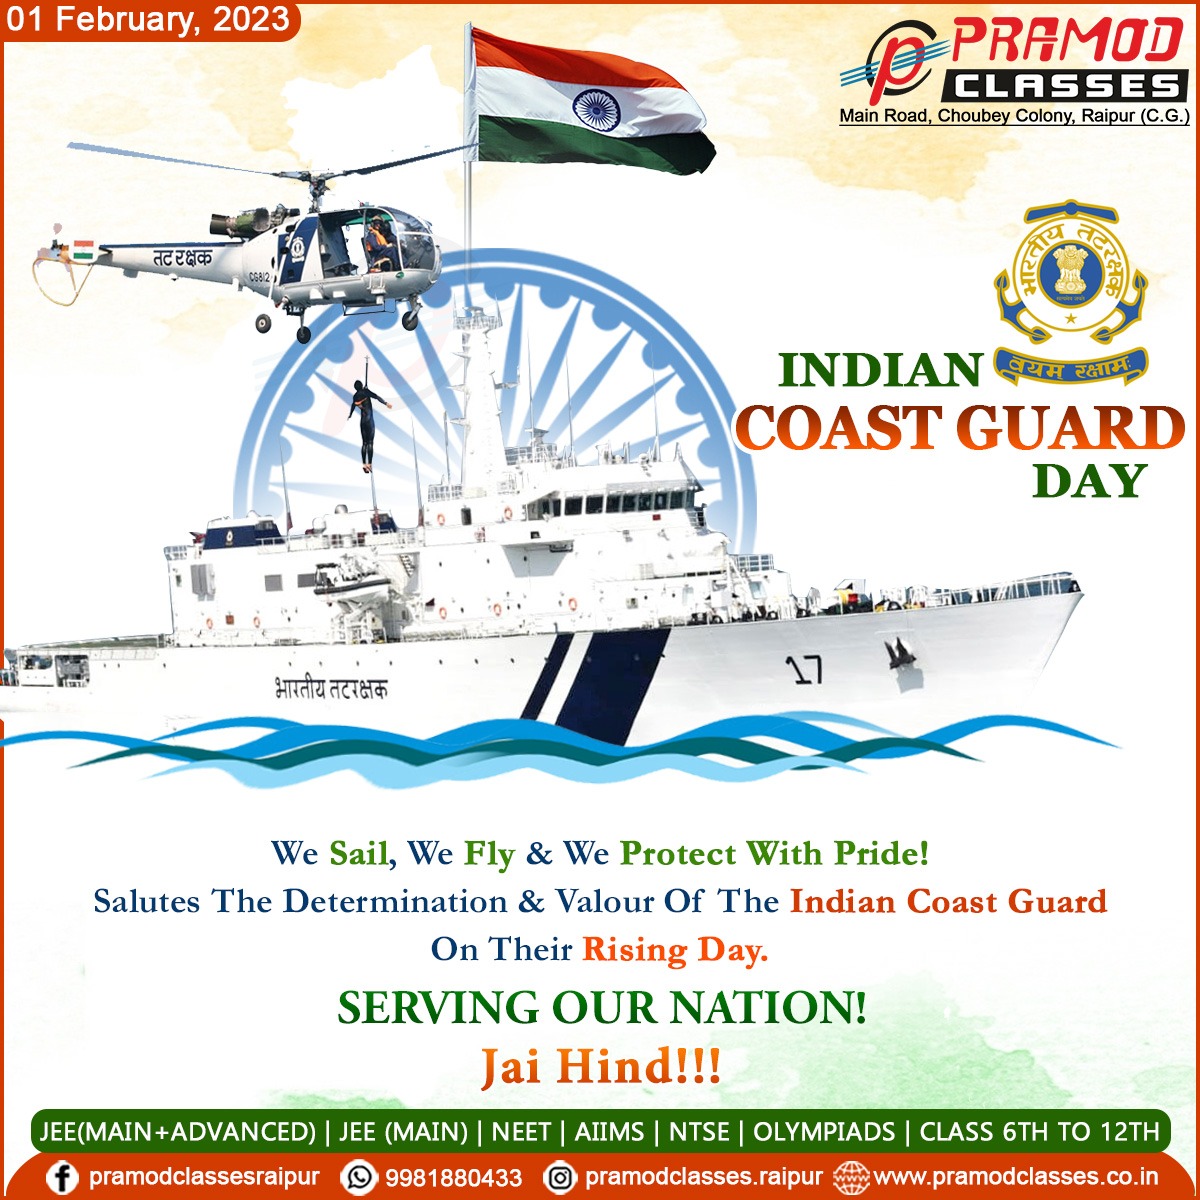 Salutes The Determination And Valour Of The #IndianCoastGuard On Their Rising Day. The Indian Coast Guard Has Left No Stones Unturned In Tirelessly Protecting Our Maritime Interests And #ServingOurNation.
#IndianCoastGuardDay #IndianCoastGuardDay2023
#JaiHind